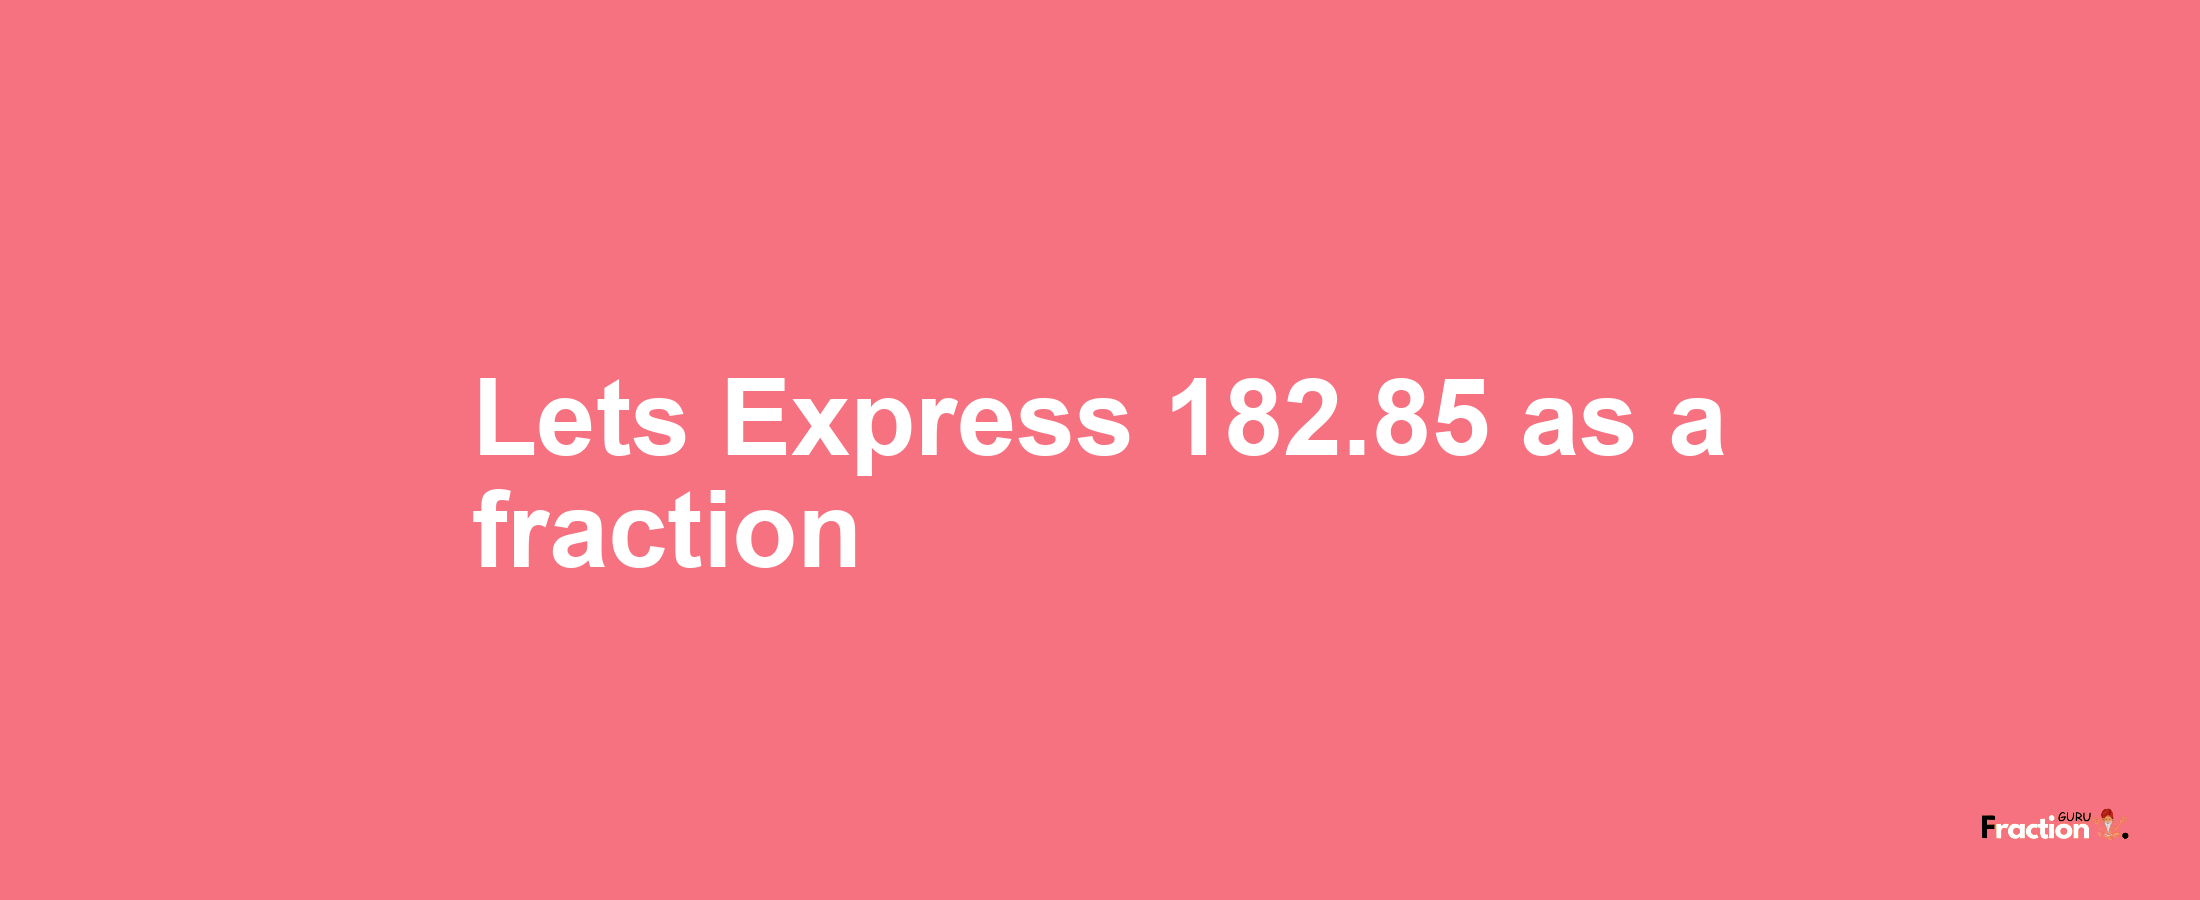 Lets Express 182.85 as afraction